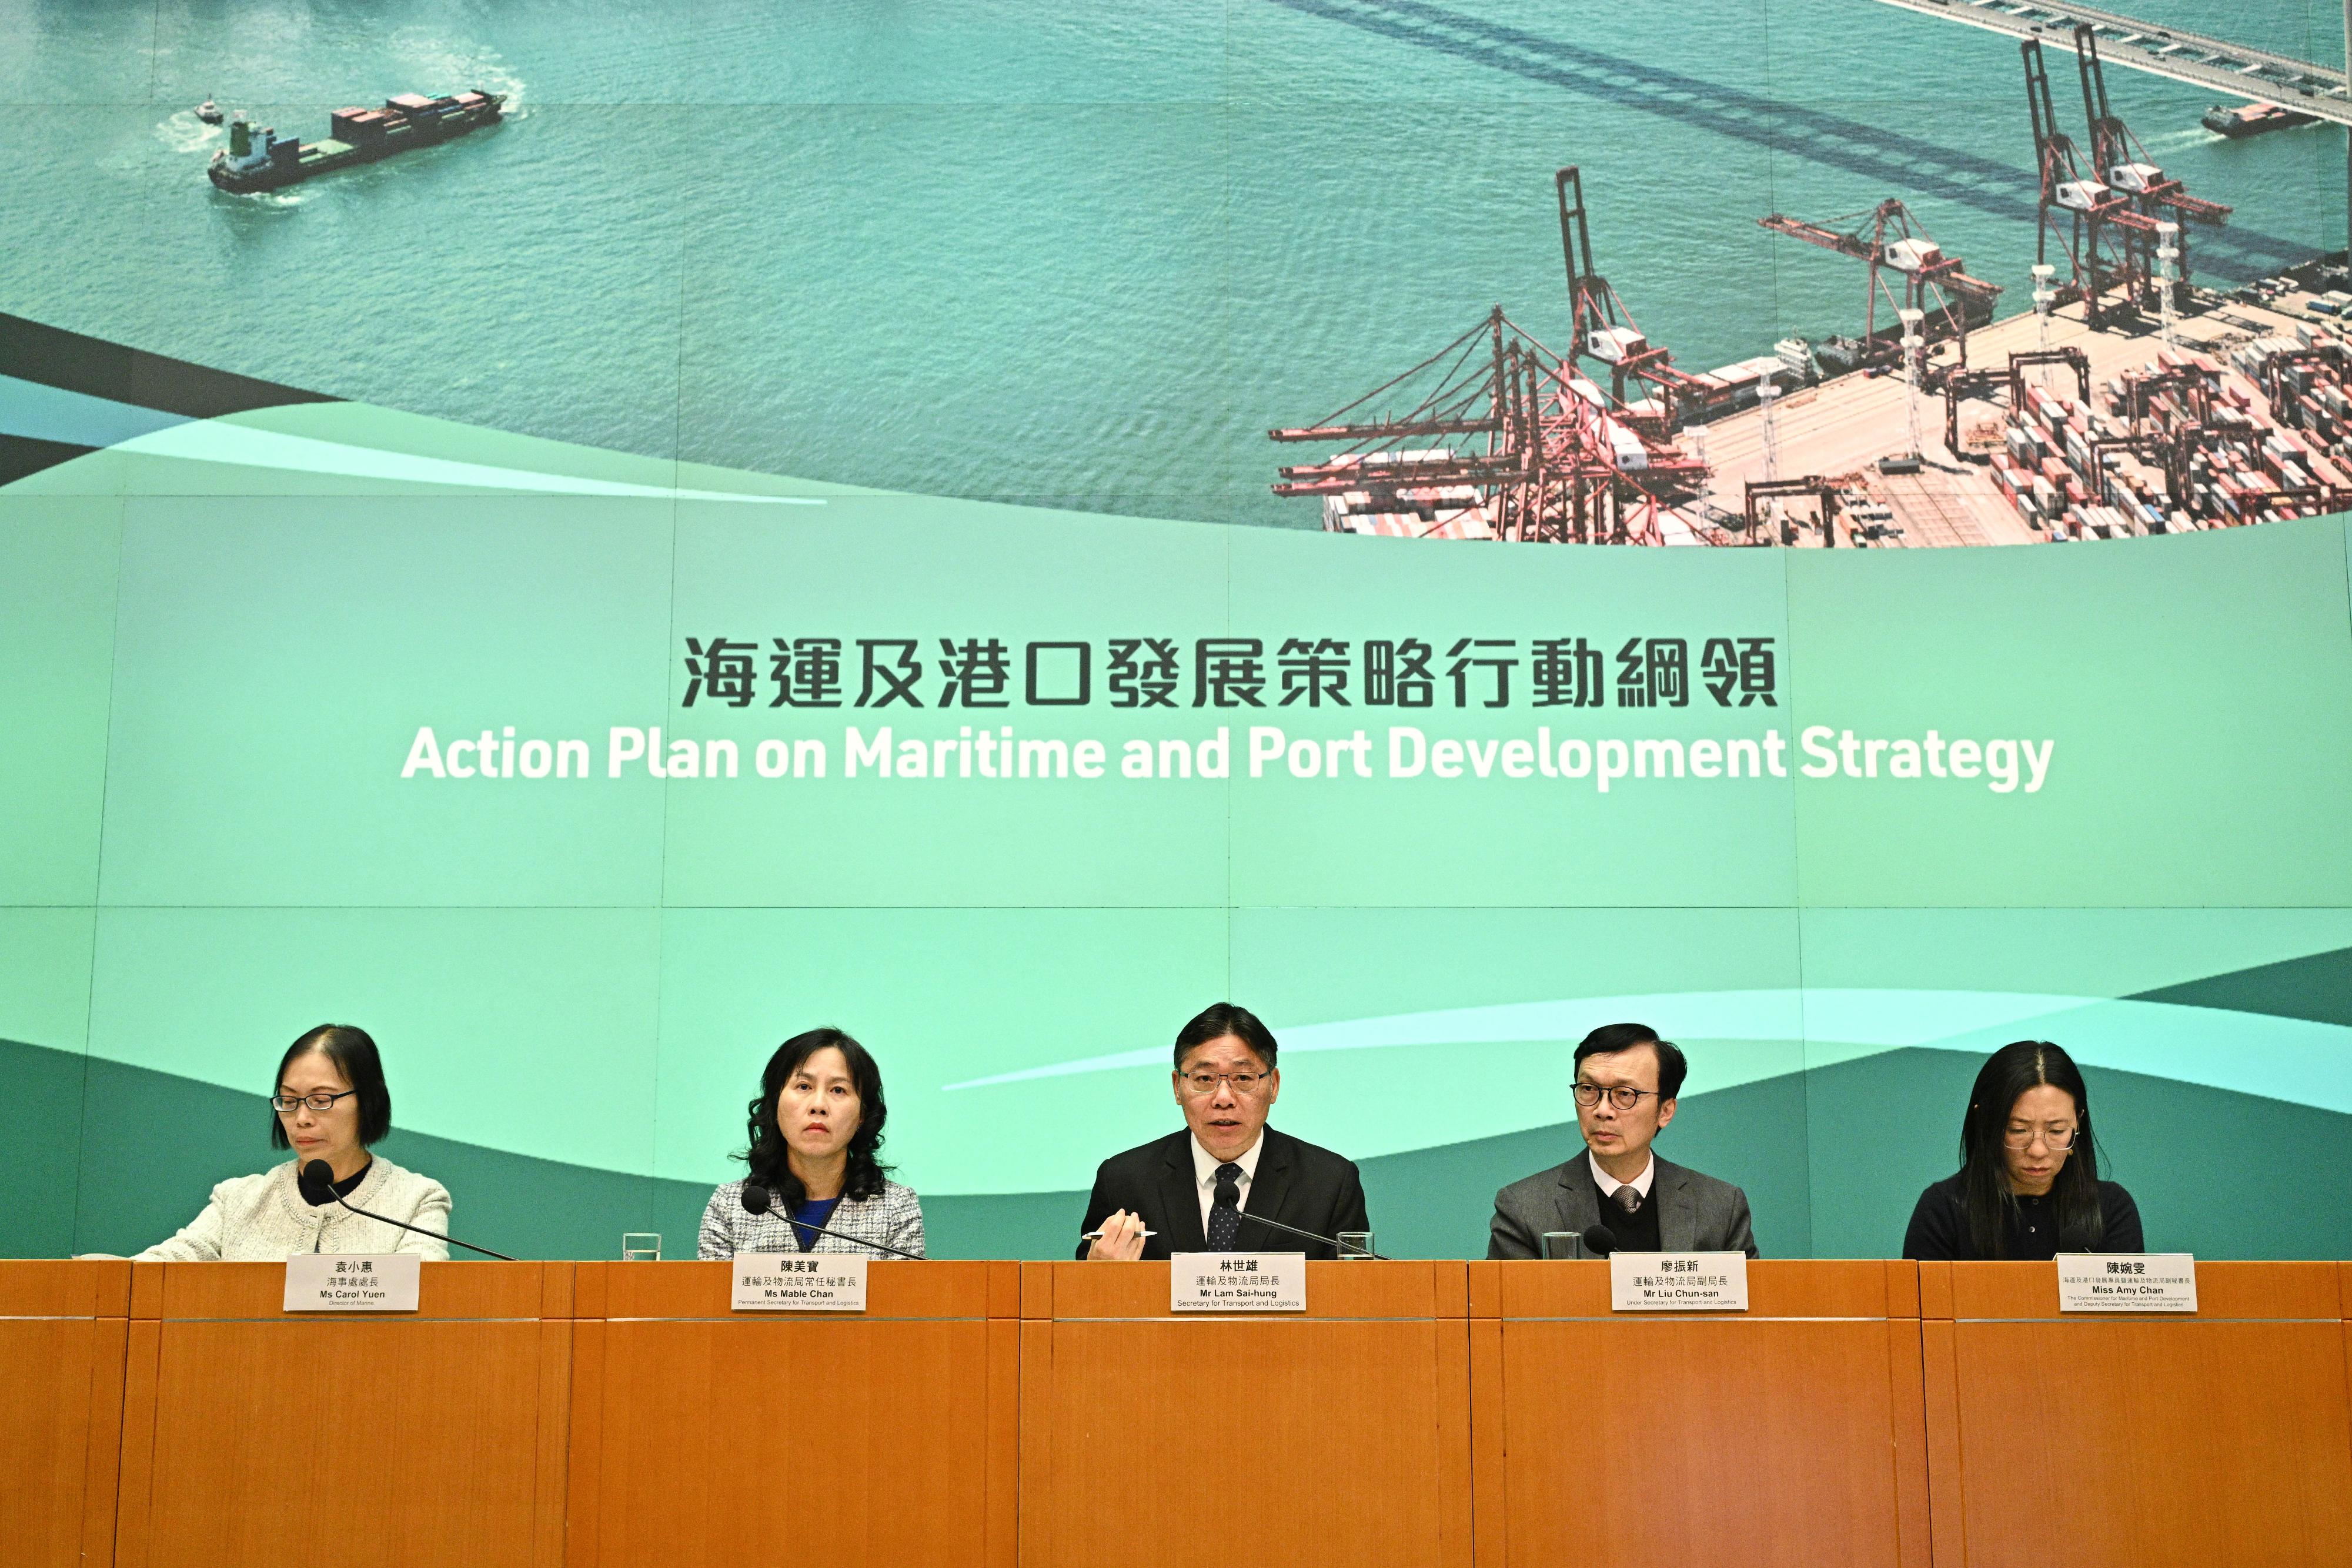 The Secretary for Transport and Logistics, Mr Lam Sai-hung (centre), promulgates today (December 20) the Action Plan on Maritime and Port Development Strategy to formulate strategies and action measures to support the sustainable development needs of the maritime and port industry in Hong Kong, with a view to enhancing the long-term competitiveness of the industry. Also present are the Permanent Secretary for Transport and Logistics, Ms Mable Chan (second left); the Under Secretary for Transport and Logistics, Mr Liu Chun-san (second right); the Director of Marine, Ms Carol Yuen (first left); and the Commissioner for Maritime and Port Development and Deputy Secretary for Transport and Logistics, Miss Amy Chan (first right).